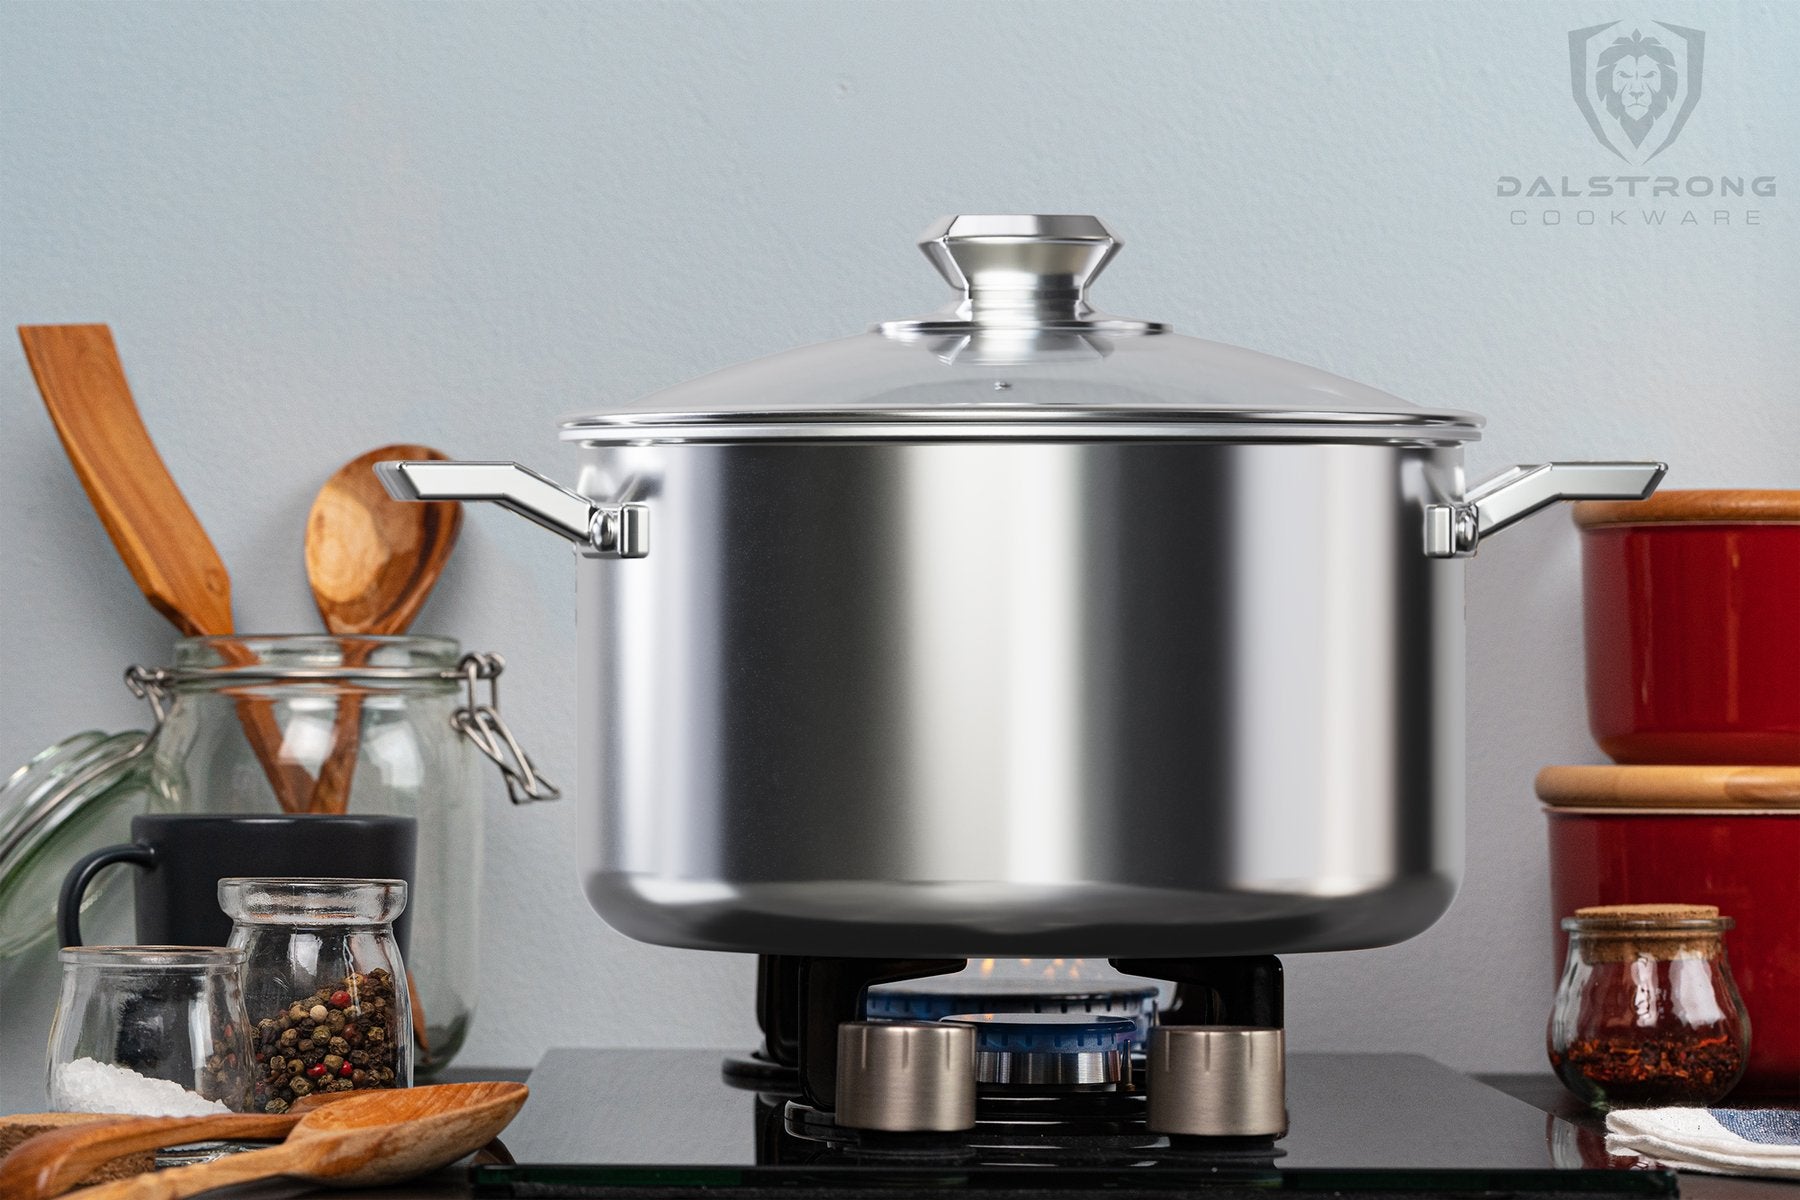 Why You Need a Big Stockpot